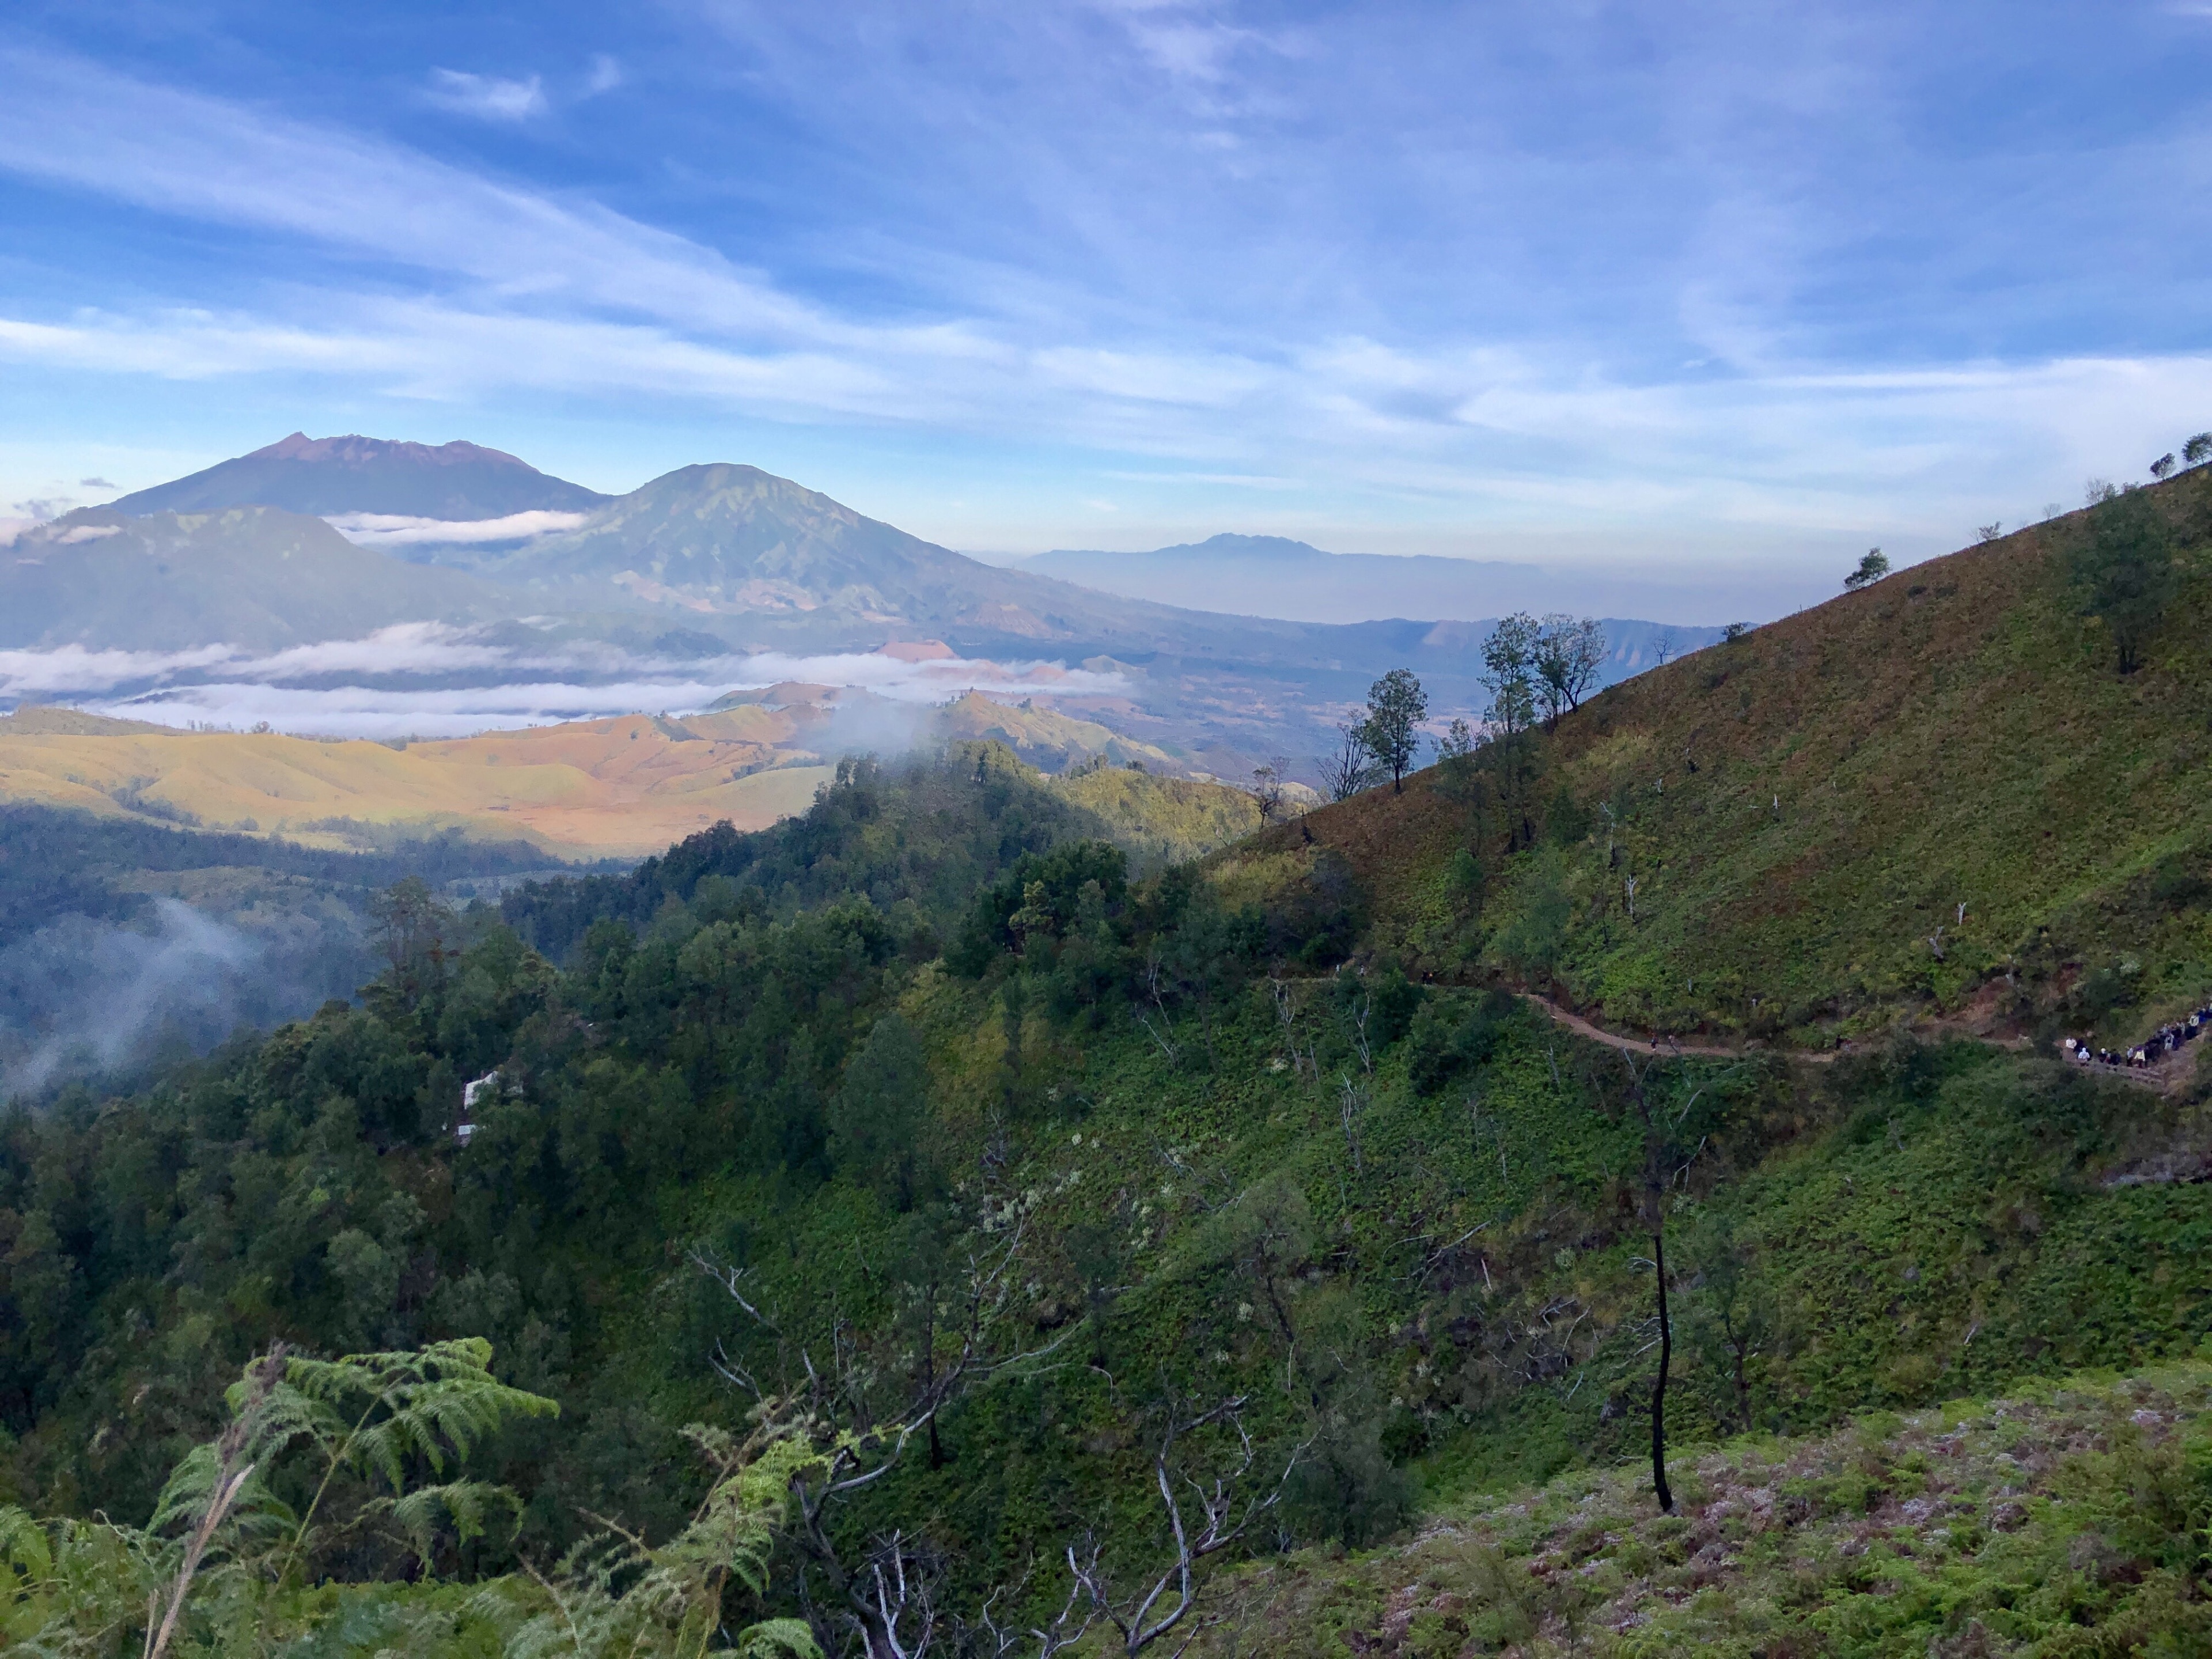 Can you see the trail to Ijen Crater. It’s quite a steep hike to get up to the crater. Took us 1.5 hours to get to the top in the dark at around 2am